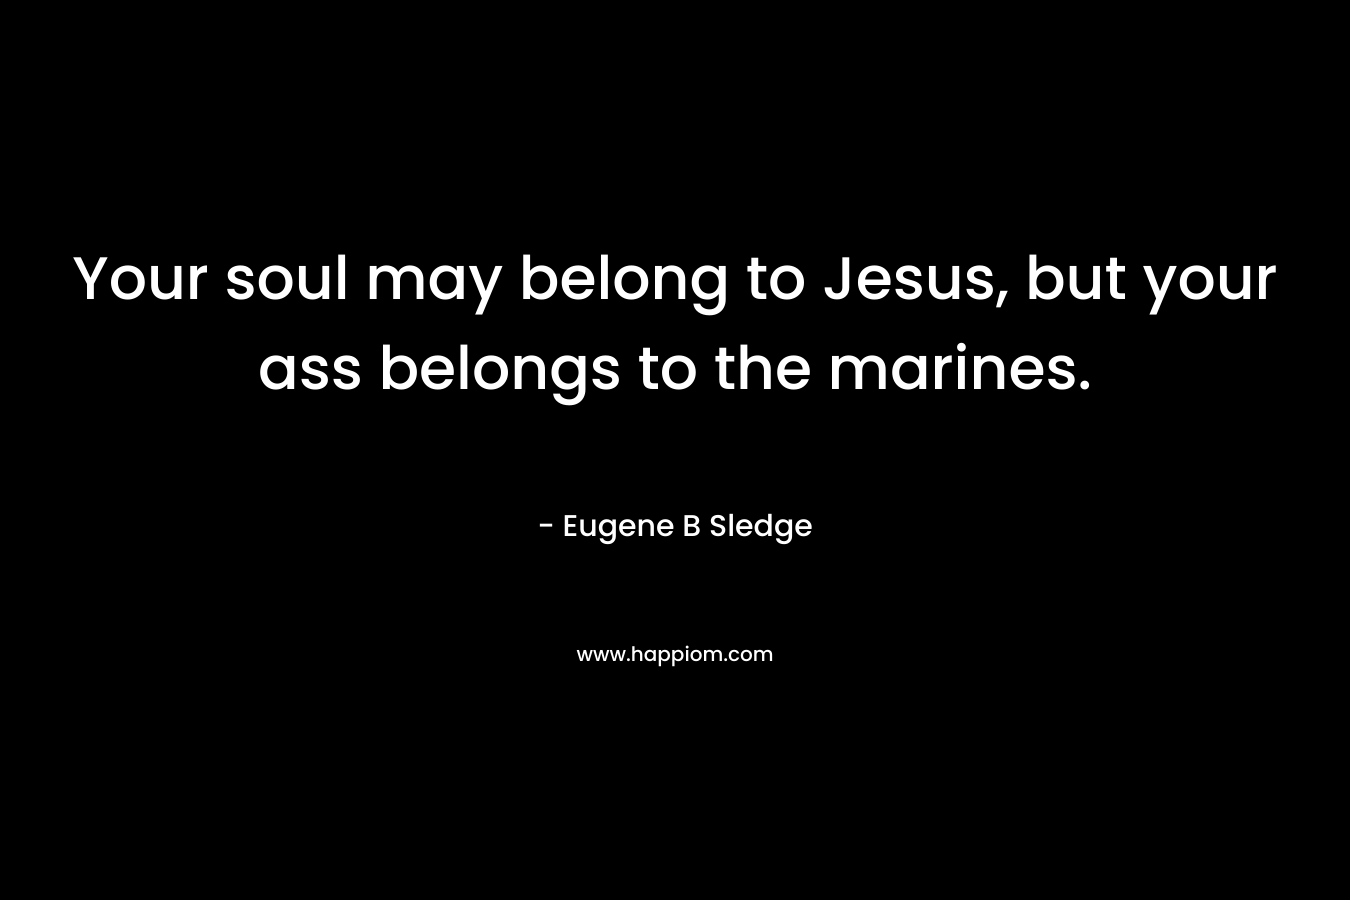 Your soul may belong to Jesus, but your ass belongs to the marines. – Eugene B Sledge